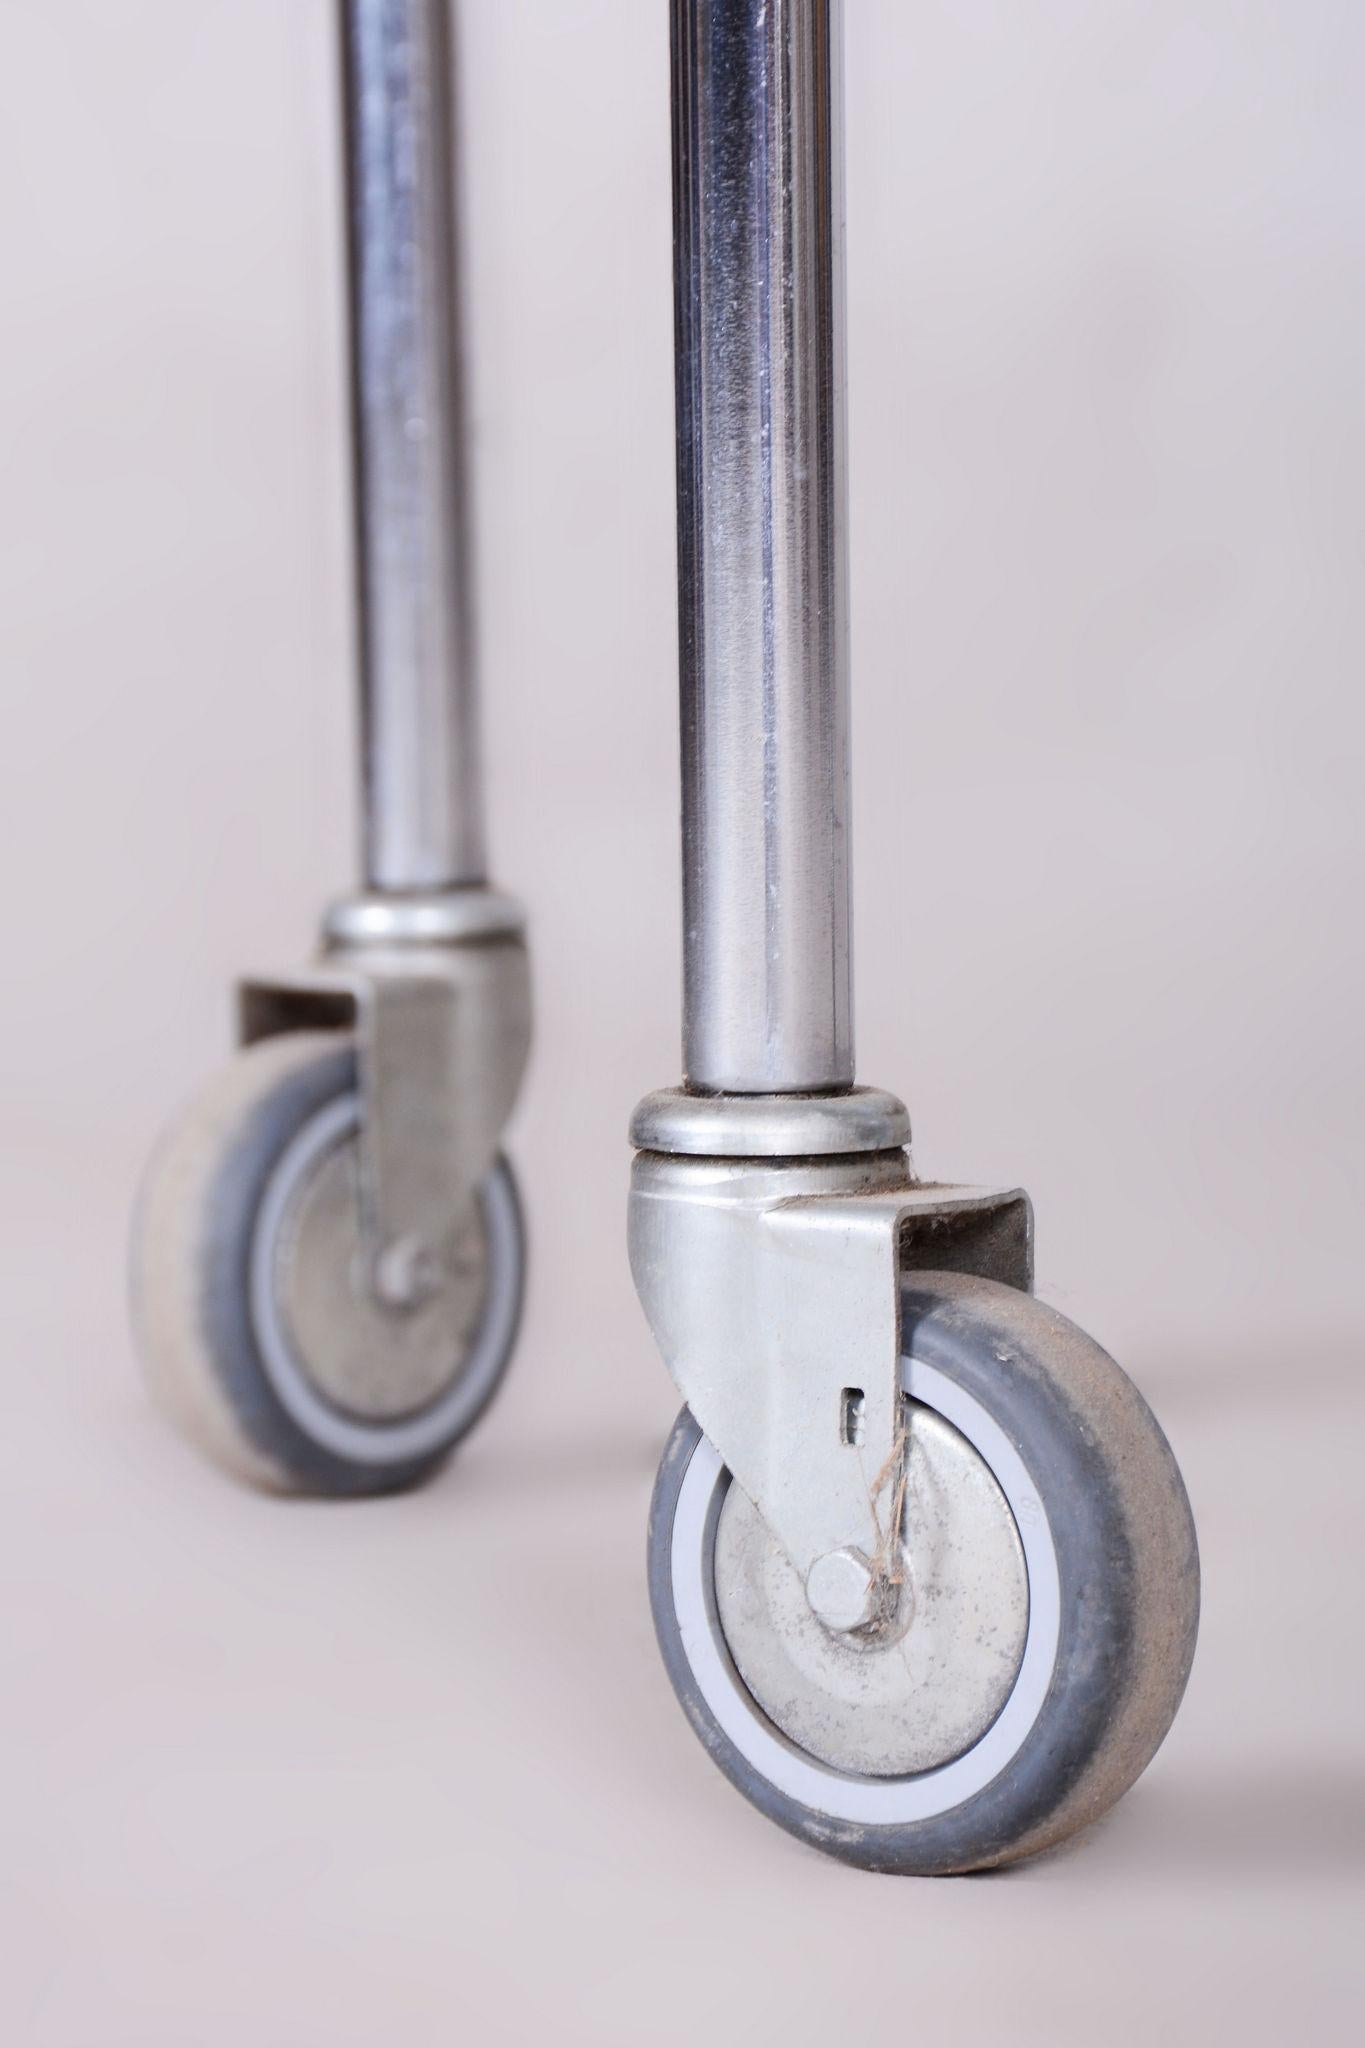 Original Bauhaus Trolley, Chrome-Plated Steel, Glass, Germany, 1940s For Sale 1